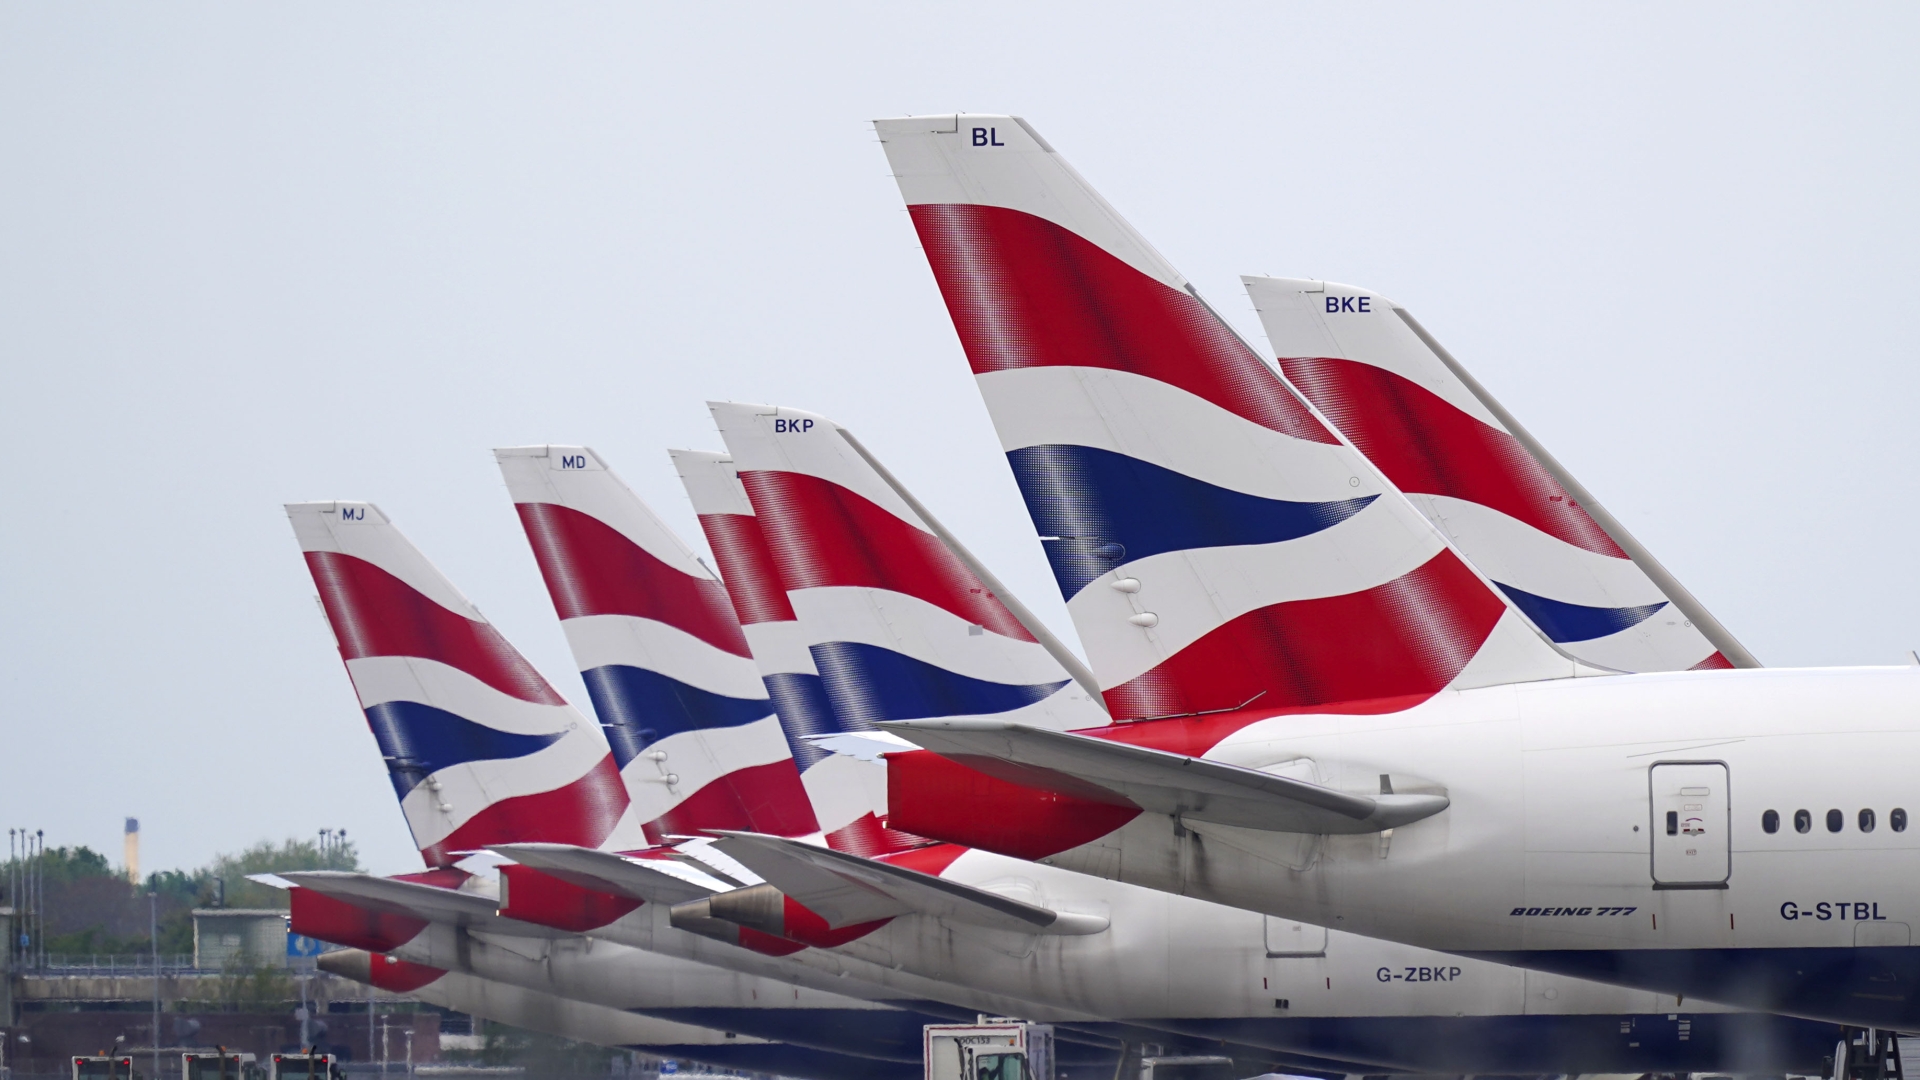 British Airways has cut 10,000 more flights during key summer holiday dates, which will affect thousands more passengers